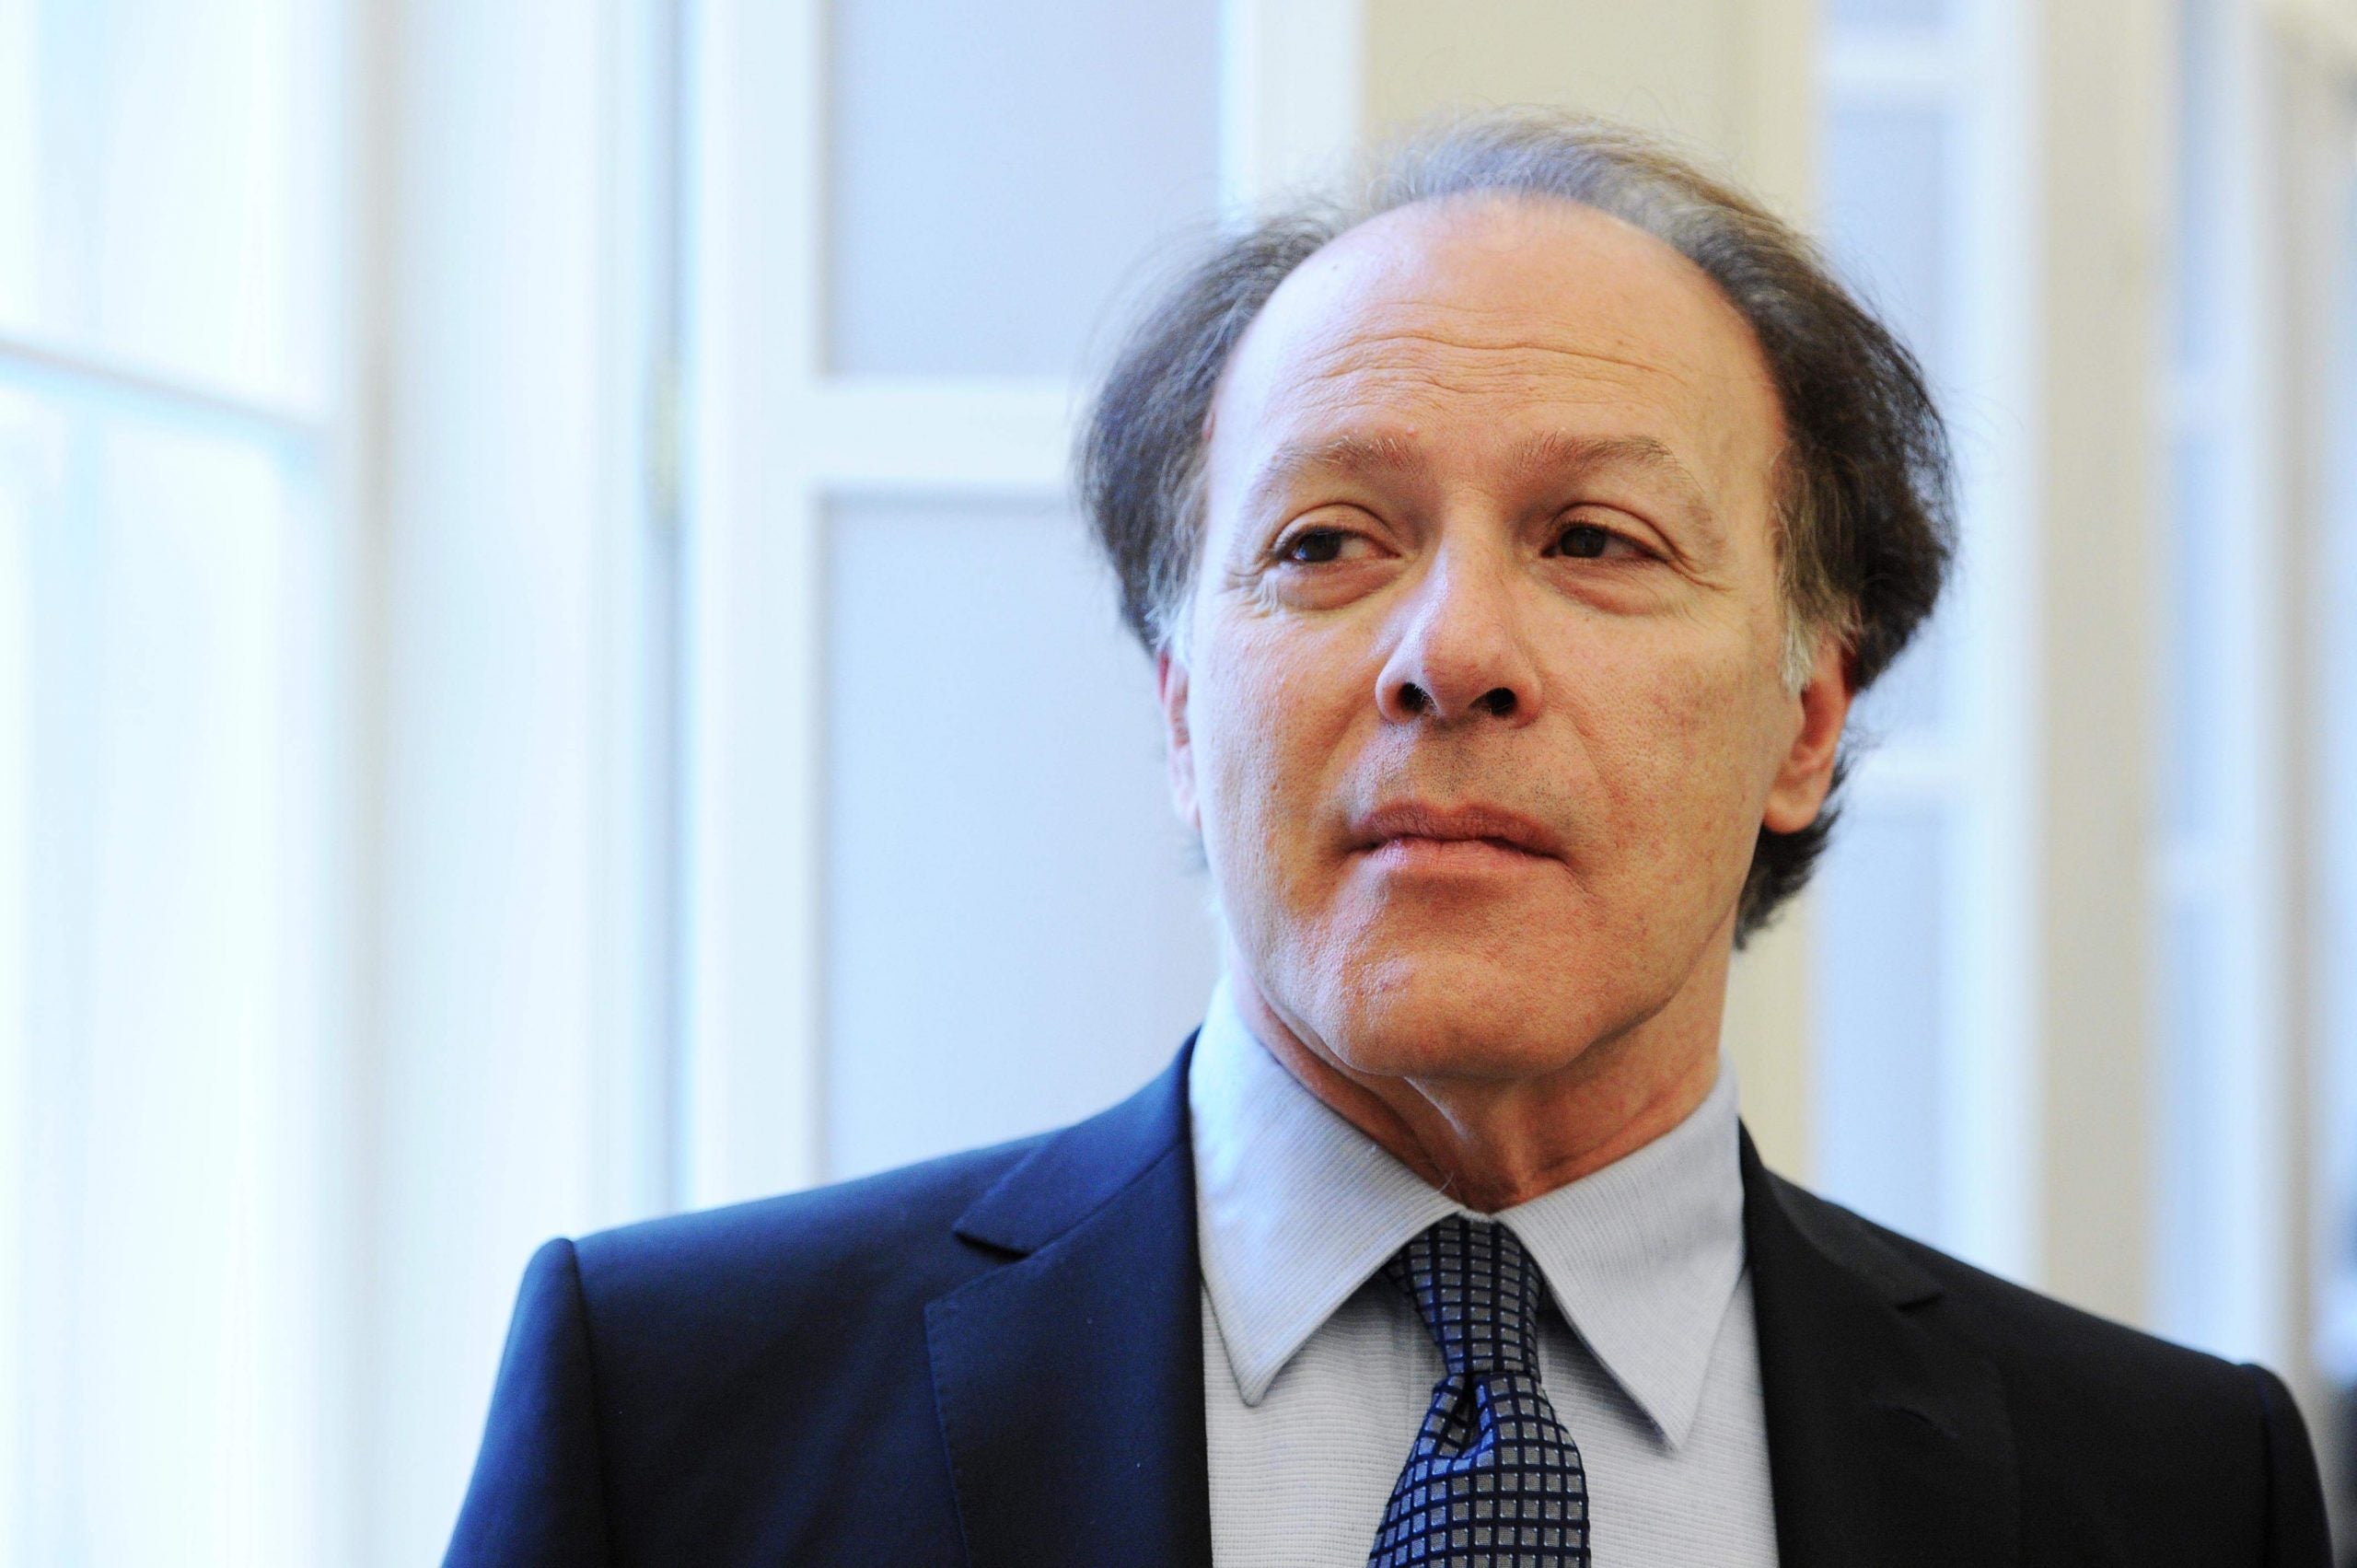 Thus Bad Begins confirms Javier Marías as a master of the novel form